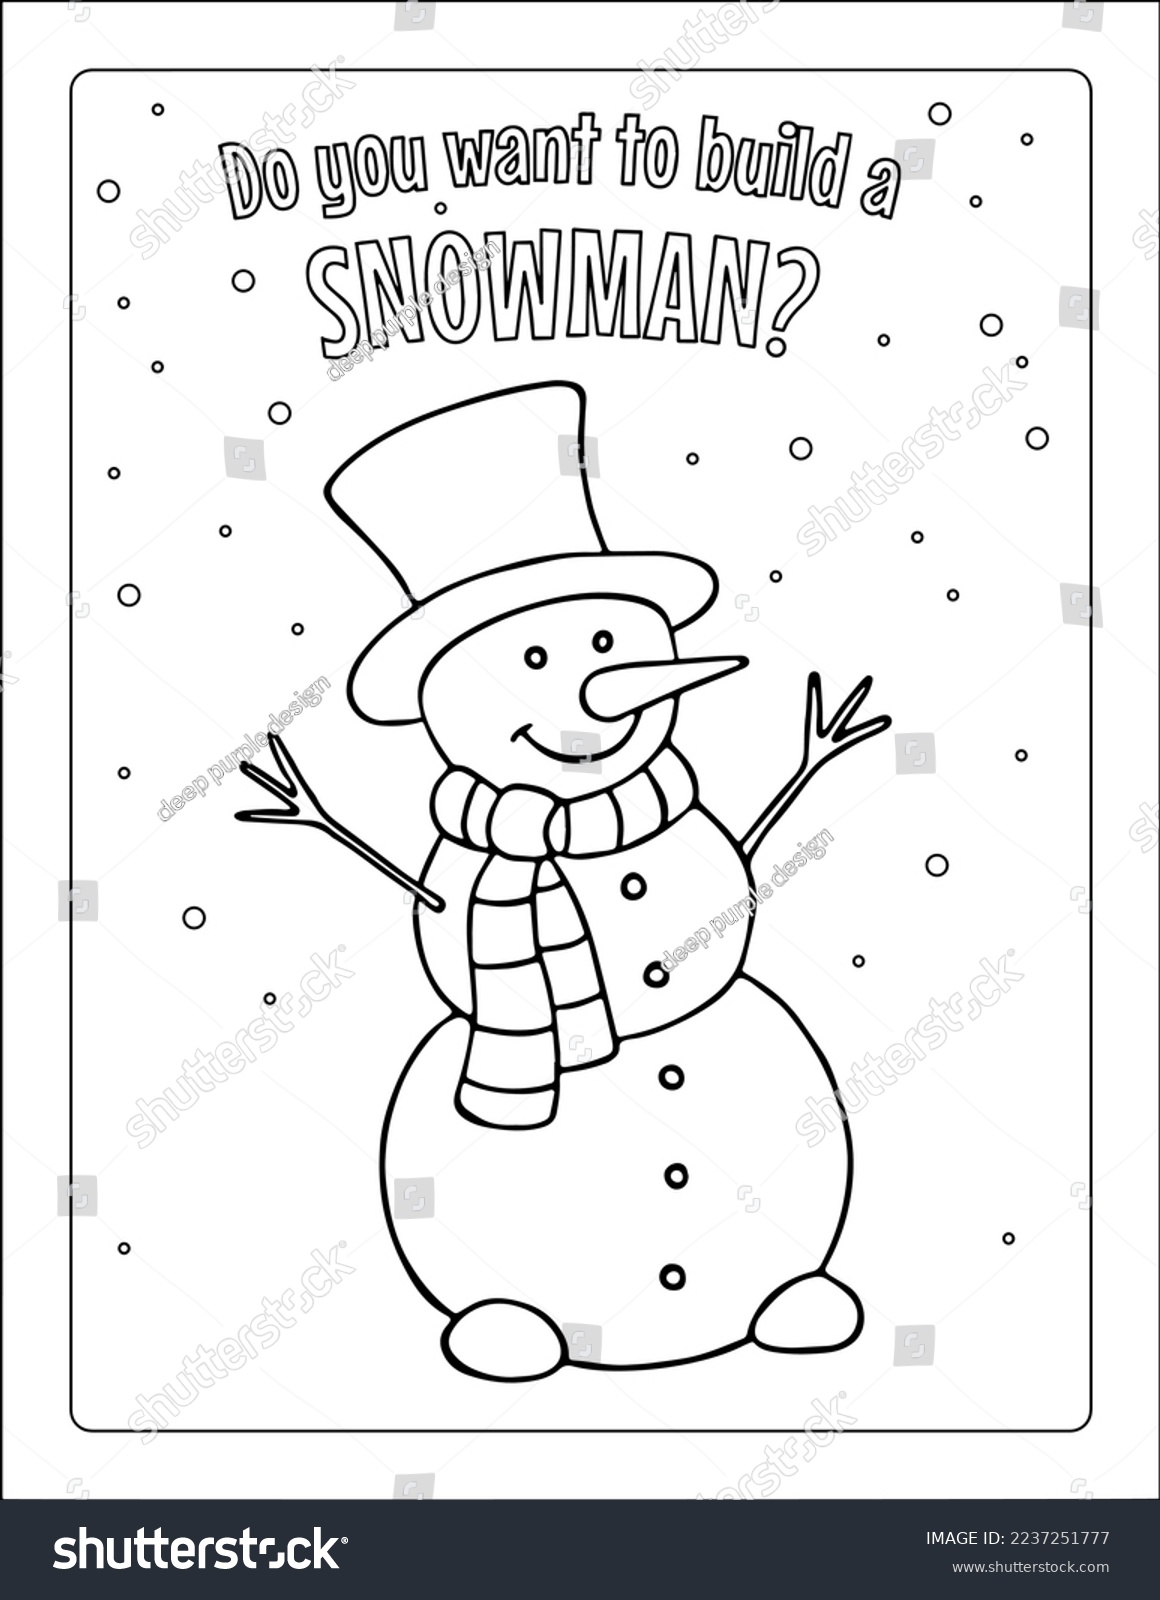 Cute snowman coloring page kids coloring stock vector royalty free